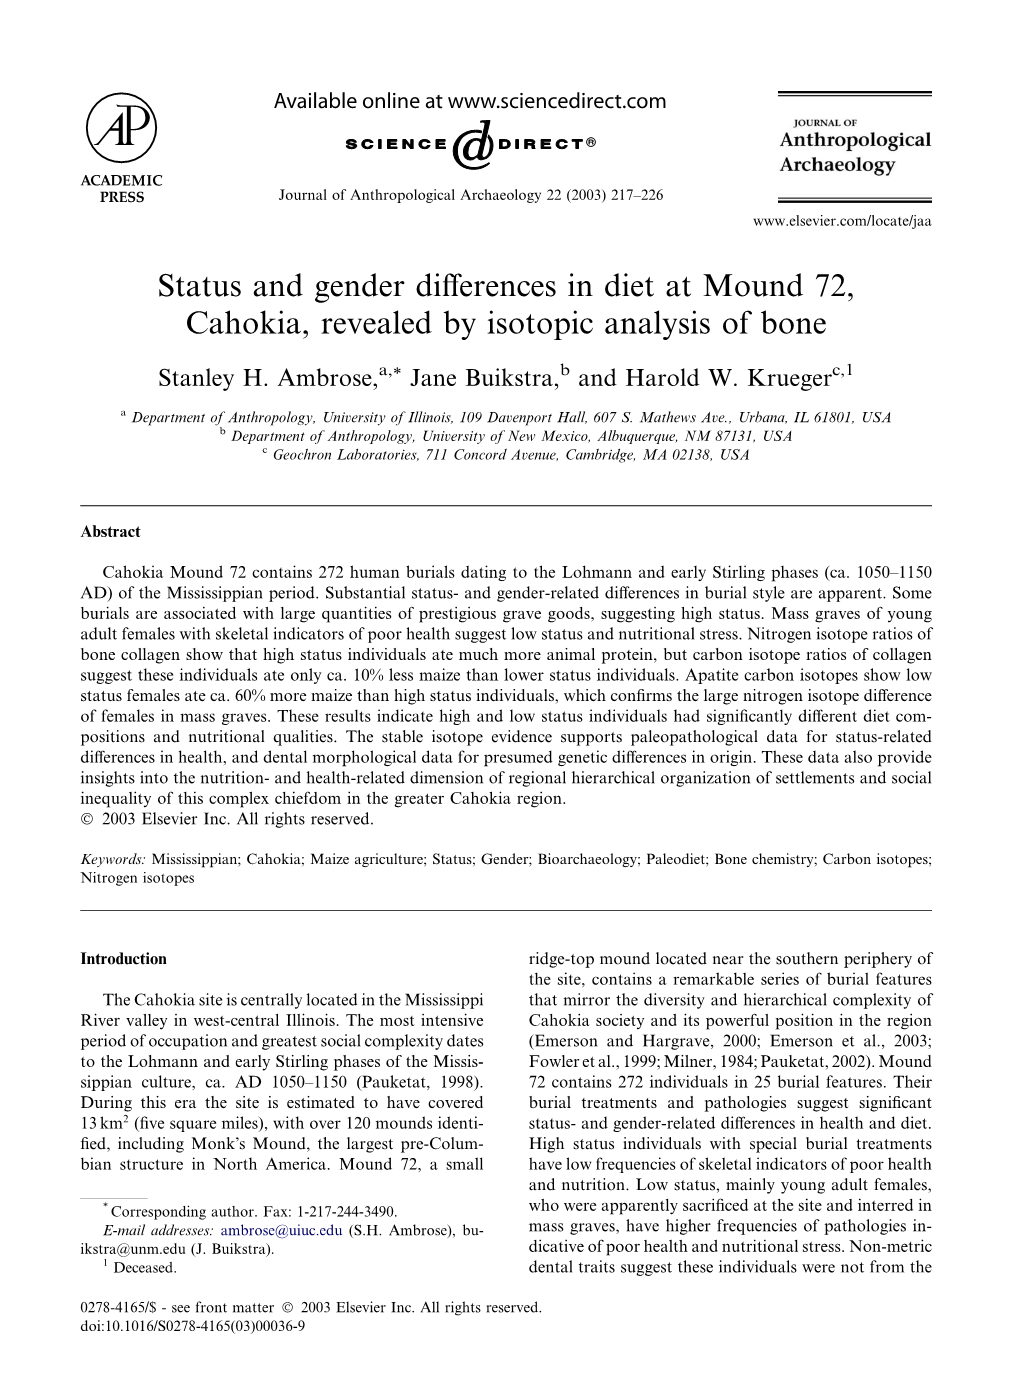 Status and Gender Differences in Diet at Mound 72, Cahokia, Revealed By